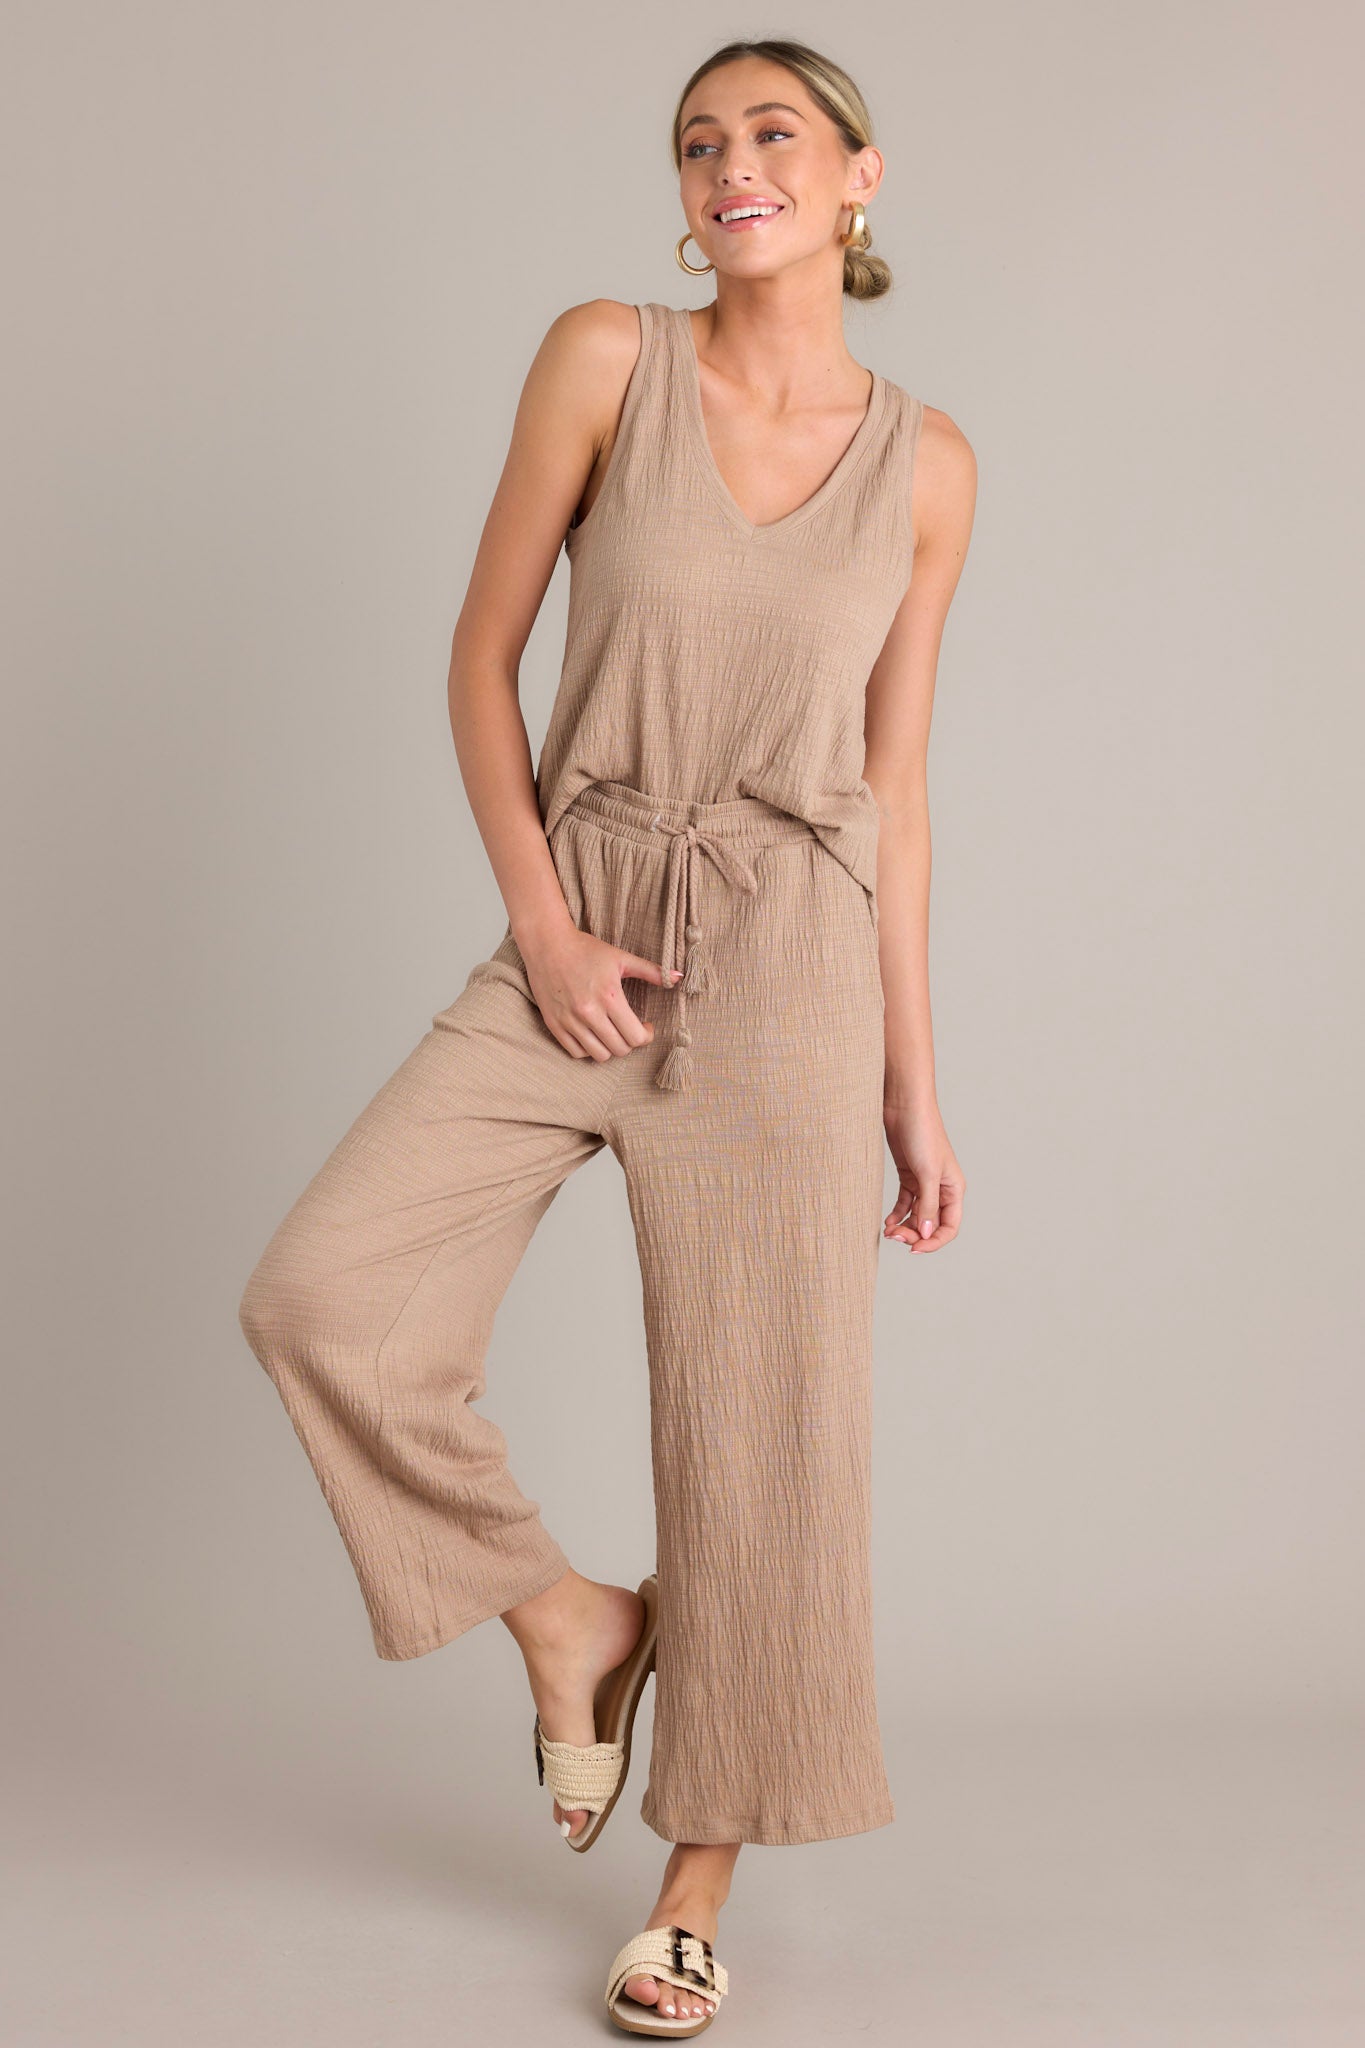 Full length view of a tan tank top featuring a V-neckline, sleeveless design, textured material, and relaxed fit.